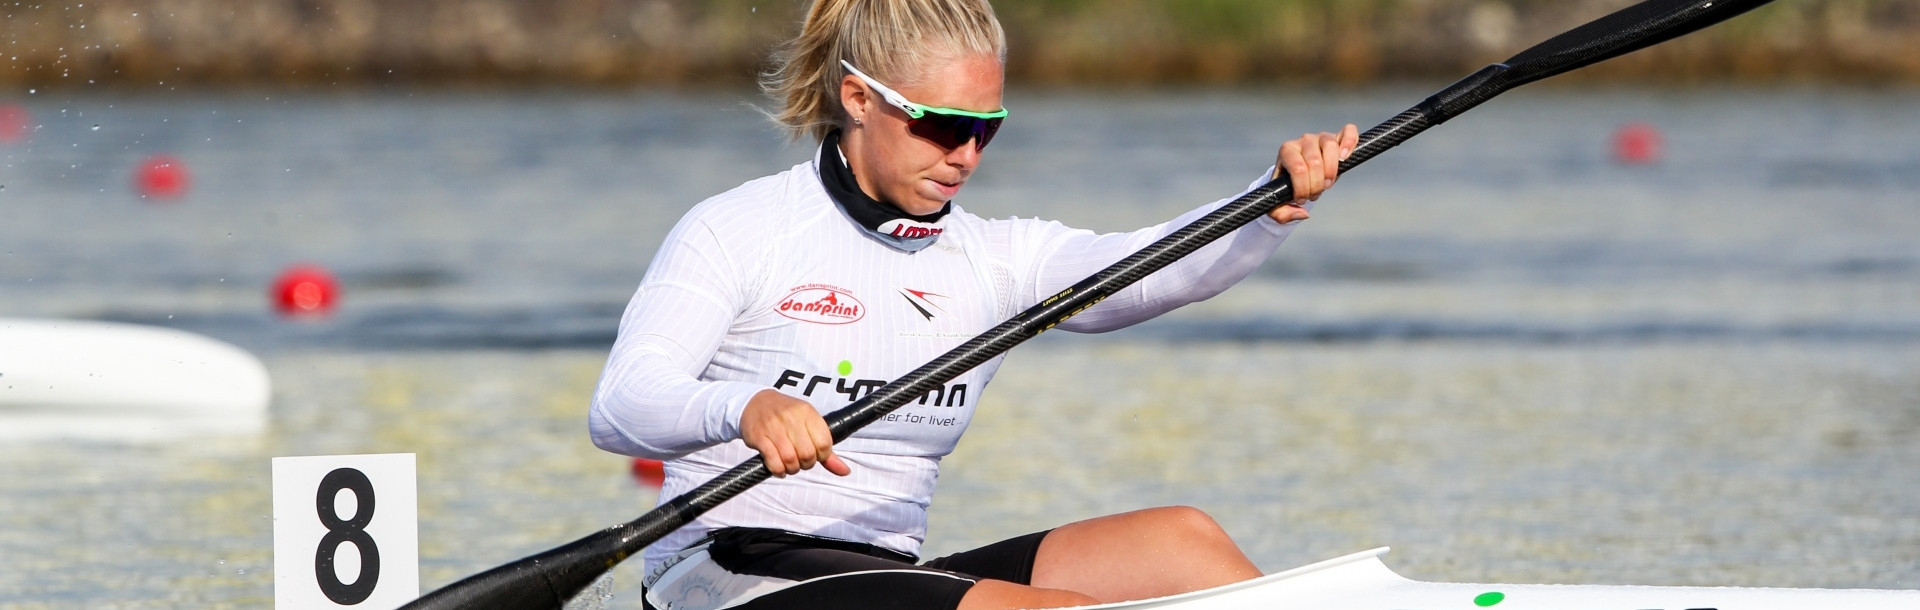 Olympic silver medalist Emma Jorgensen is hoping to challenge for a medal in the K1 500 metres, despite spending much of the year training to be a painter ©ICF